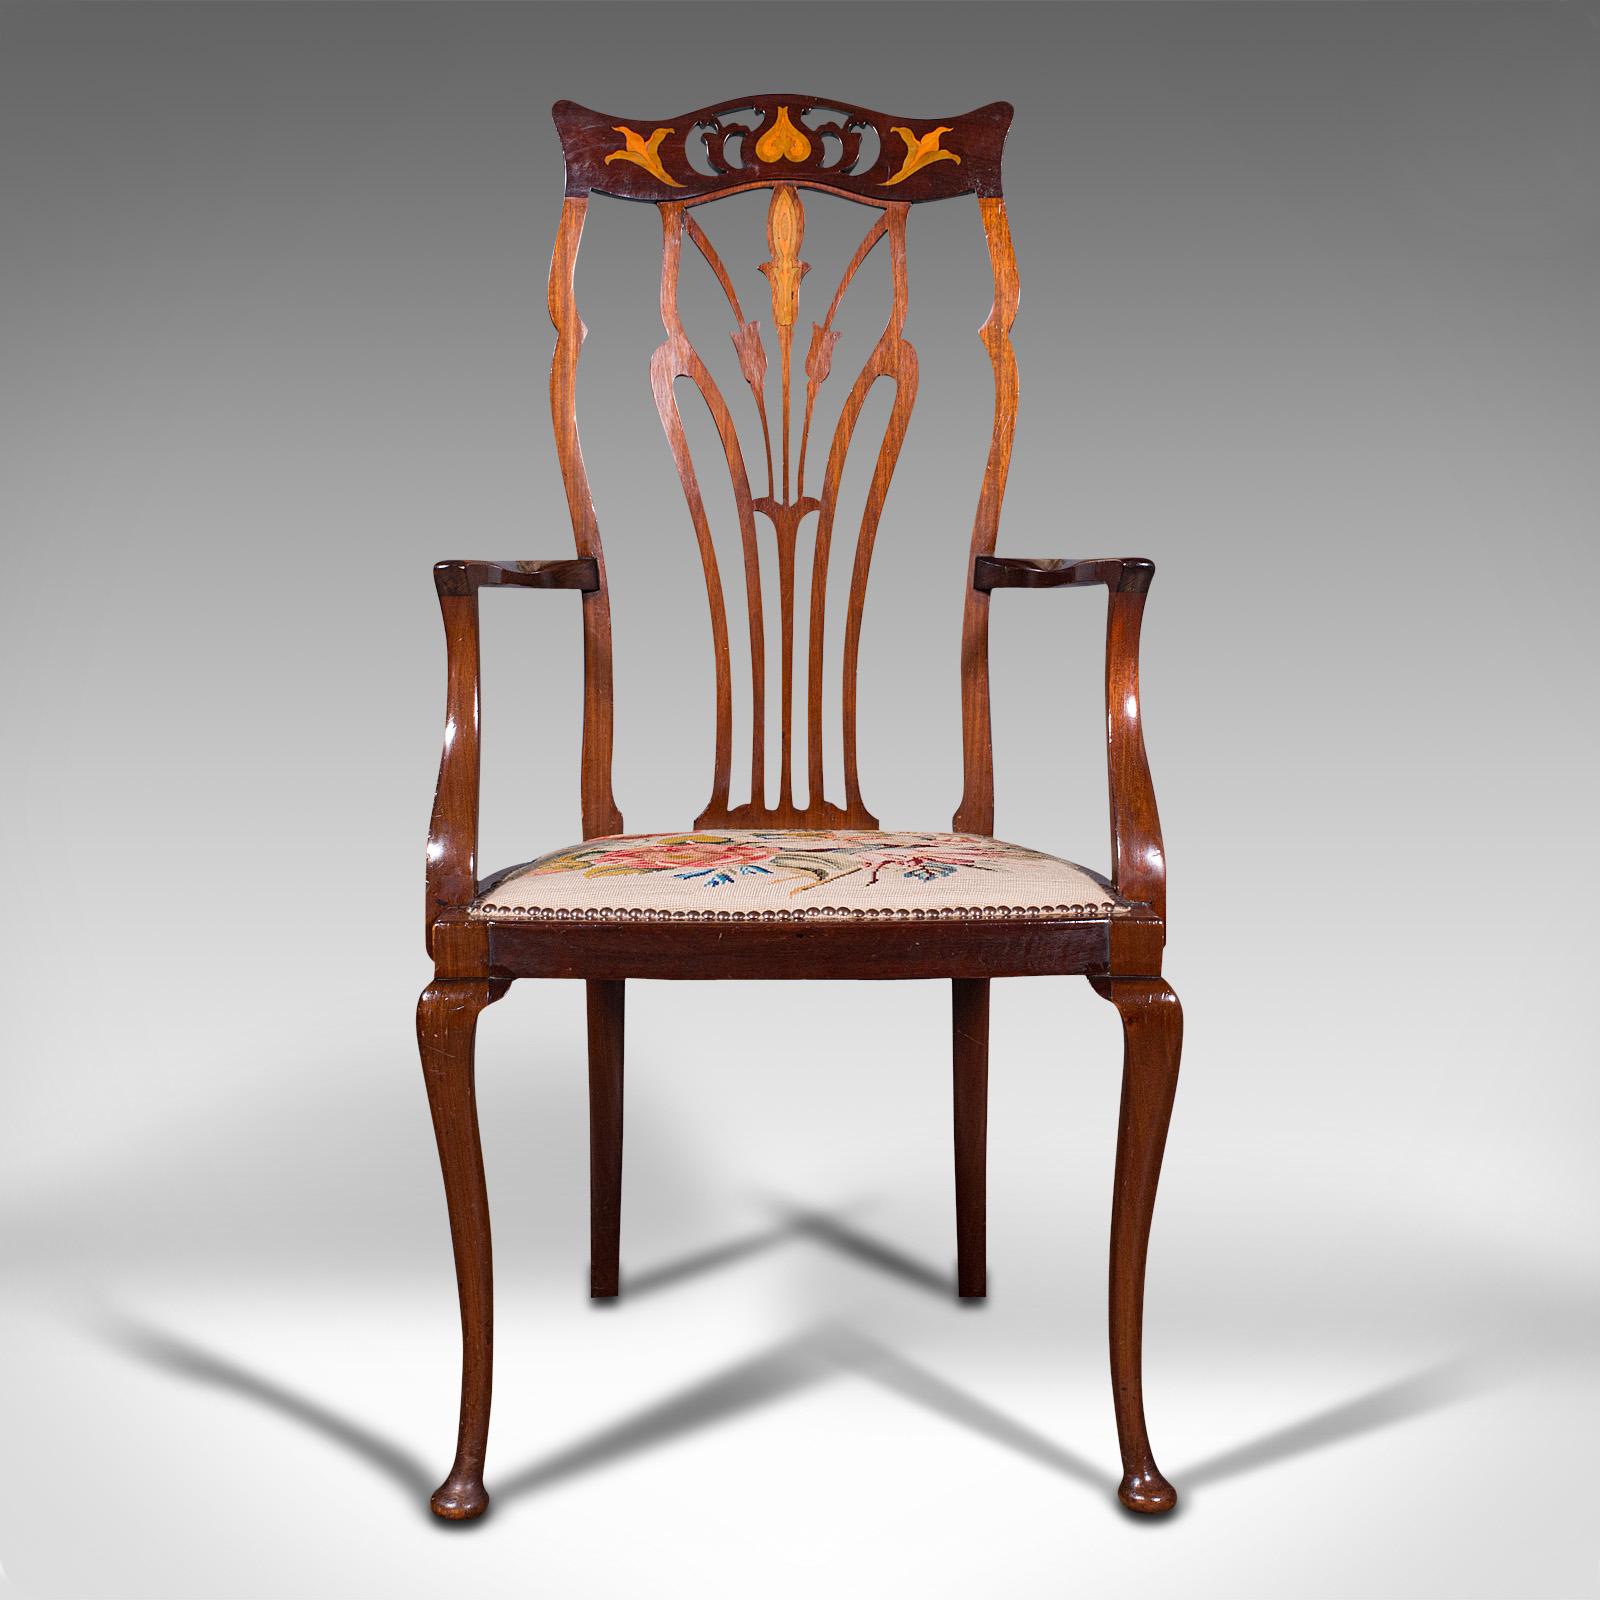 This is an antique elbow chair. An English, mahogany inlaid occasional seat in Art Nouveau taste, dating to the late Victorian period, circa 1900.

Distinguished with elegance and Art Nouveau decoration
Displays a desirable aged patina and in